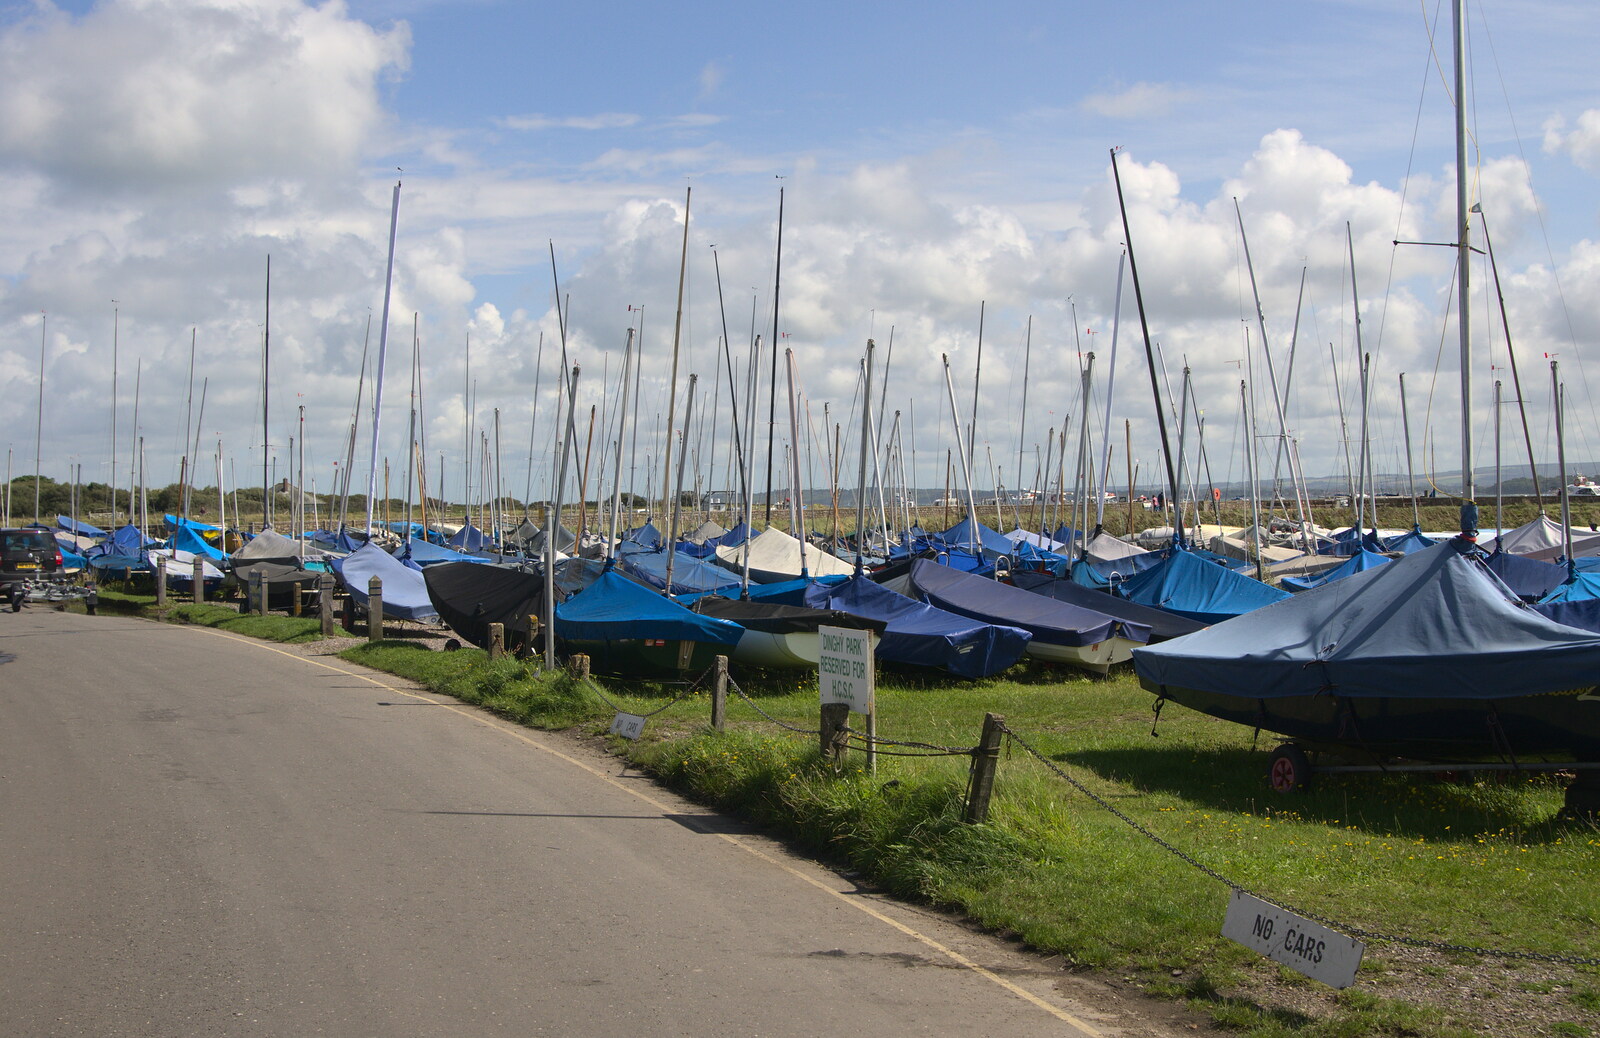 A forest of dinghies at Keyhaven from A Trip to Hurst Castle, Keyhaven, Hampshire - 28th August 2015